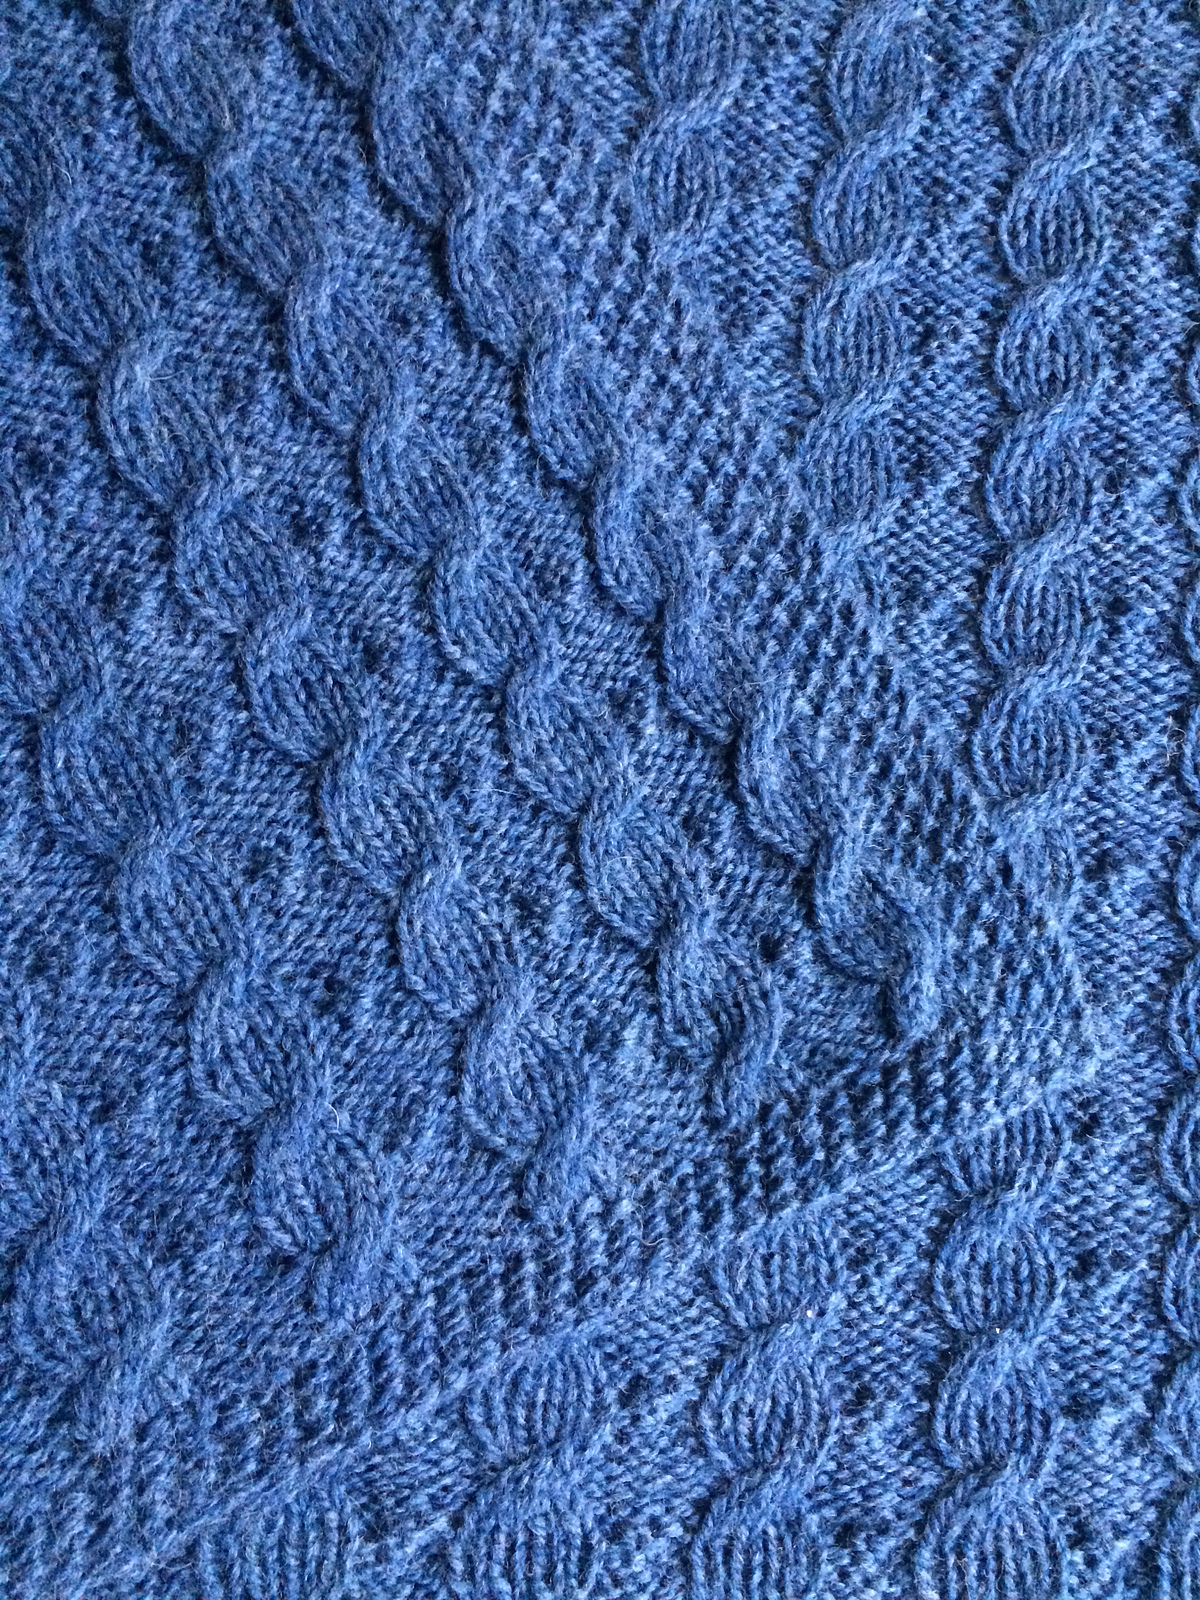 Reversible Cable Knitting Patterns In the Loop Knitting